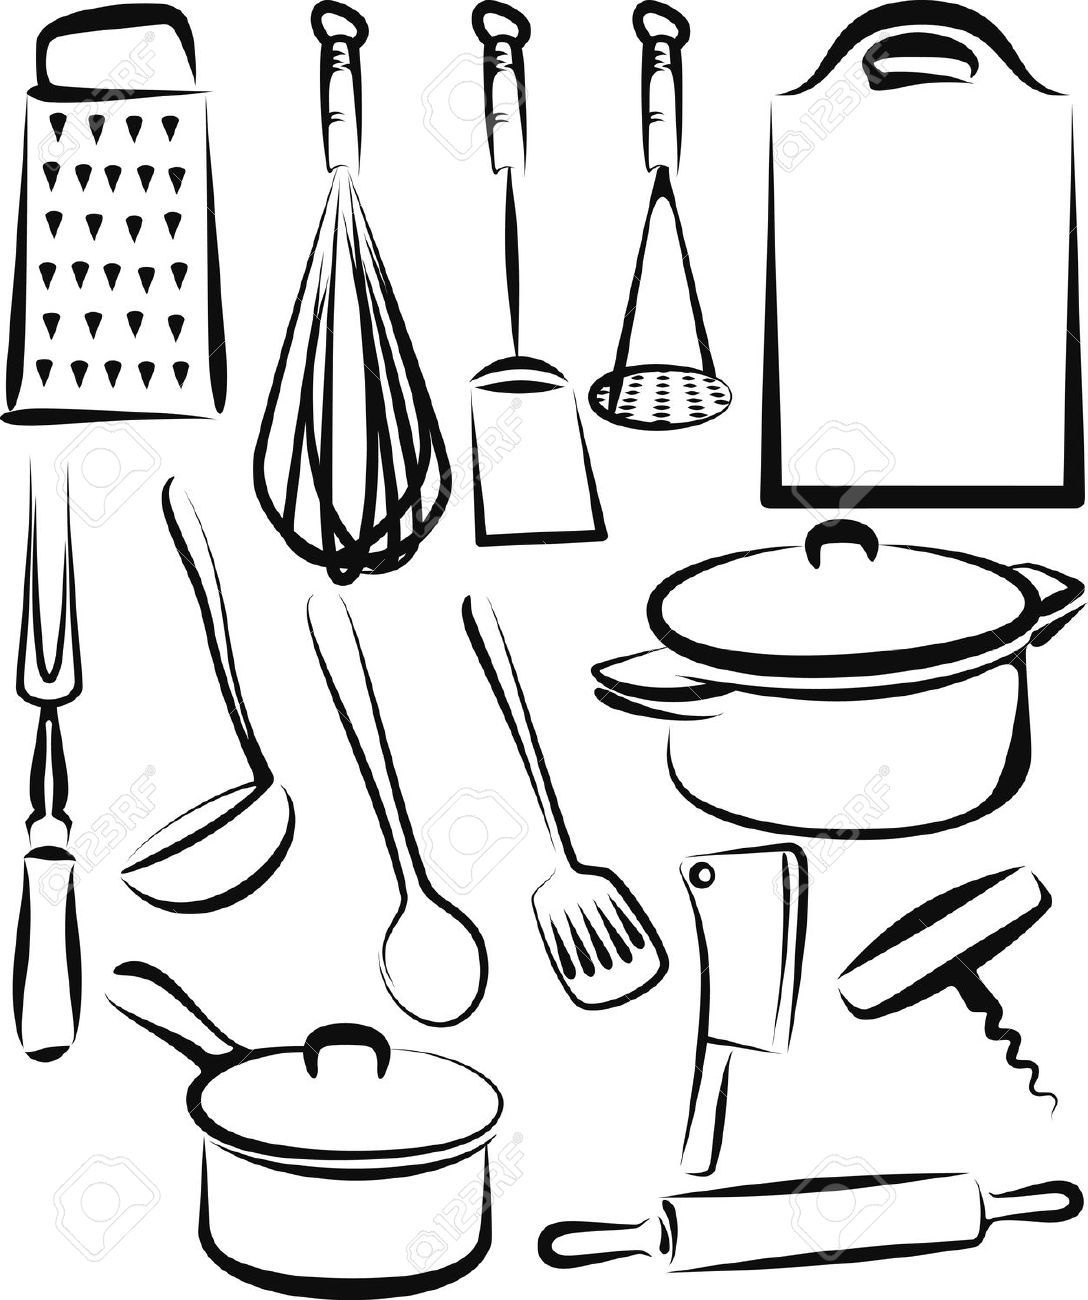 Cooking Utensils Clip Art Set Commercial Use Clip Art Set Cooking Clip Art  Hand Drawn Clipart Set Pots and Pans Clip Art -  Norway